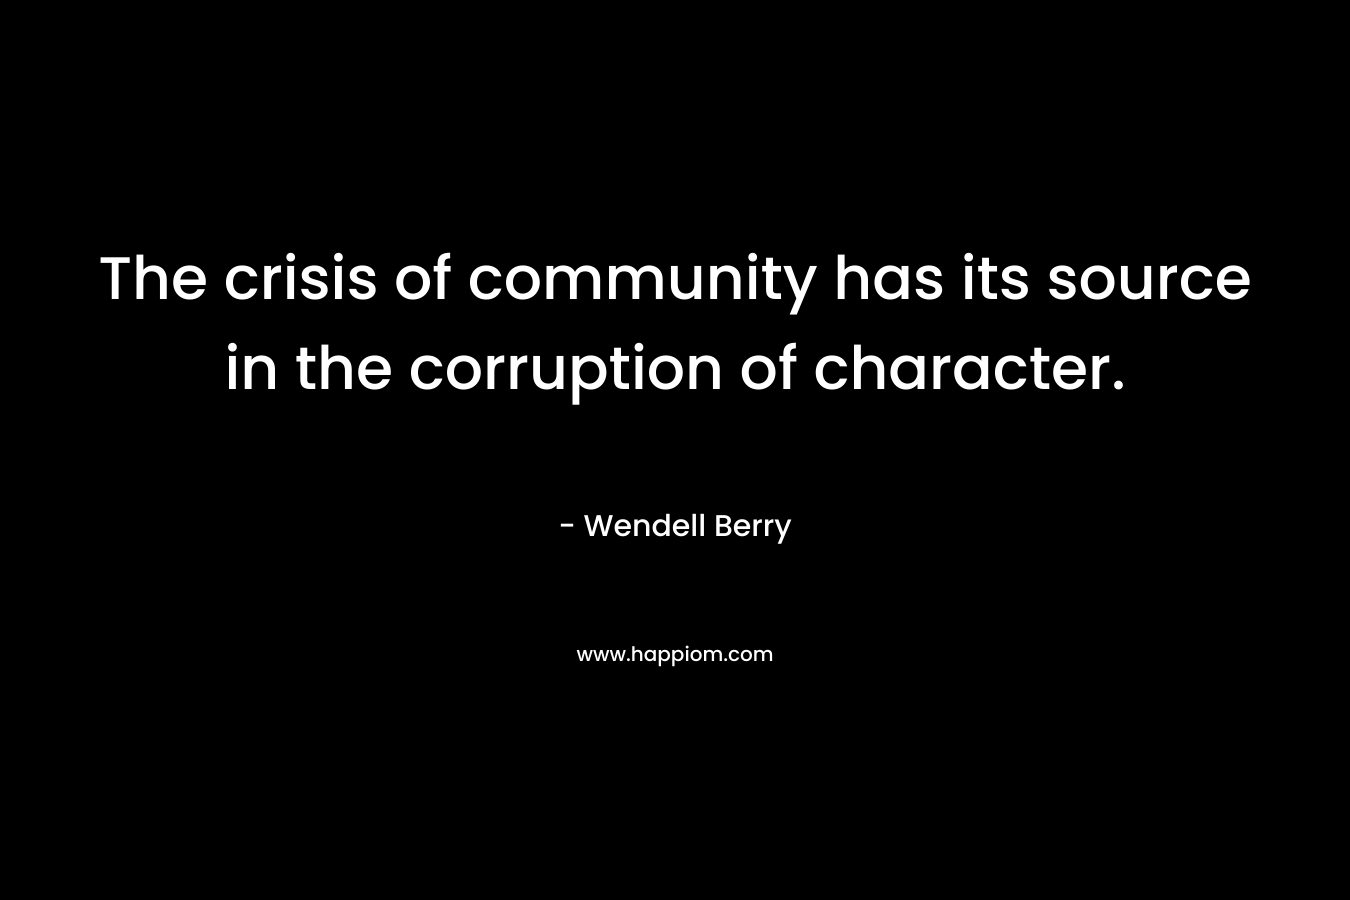 The crisis of community has its source in the corruption of character. – Wendell Berry